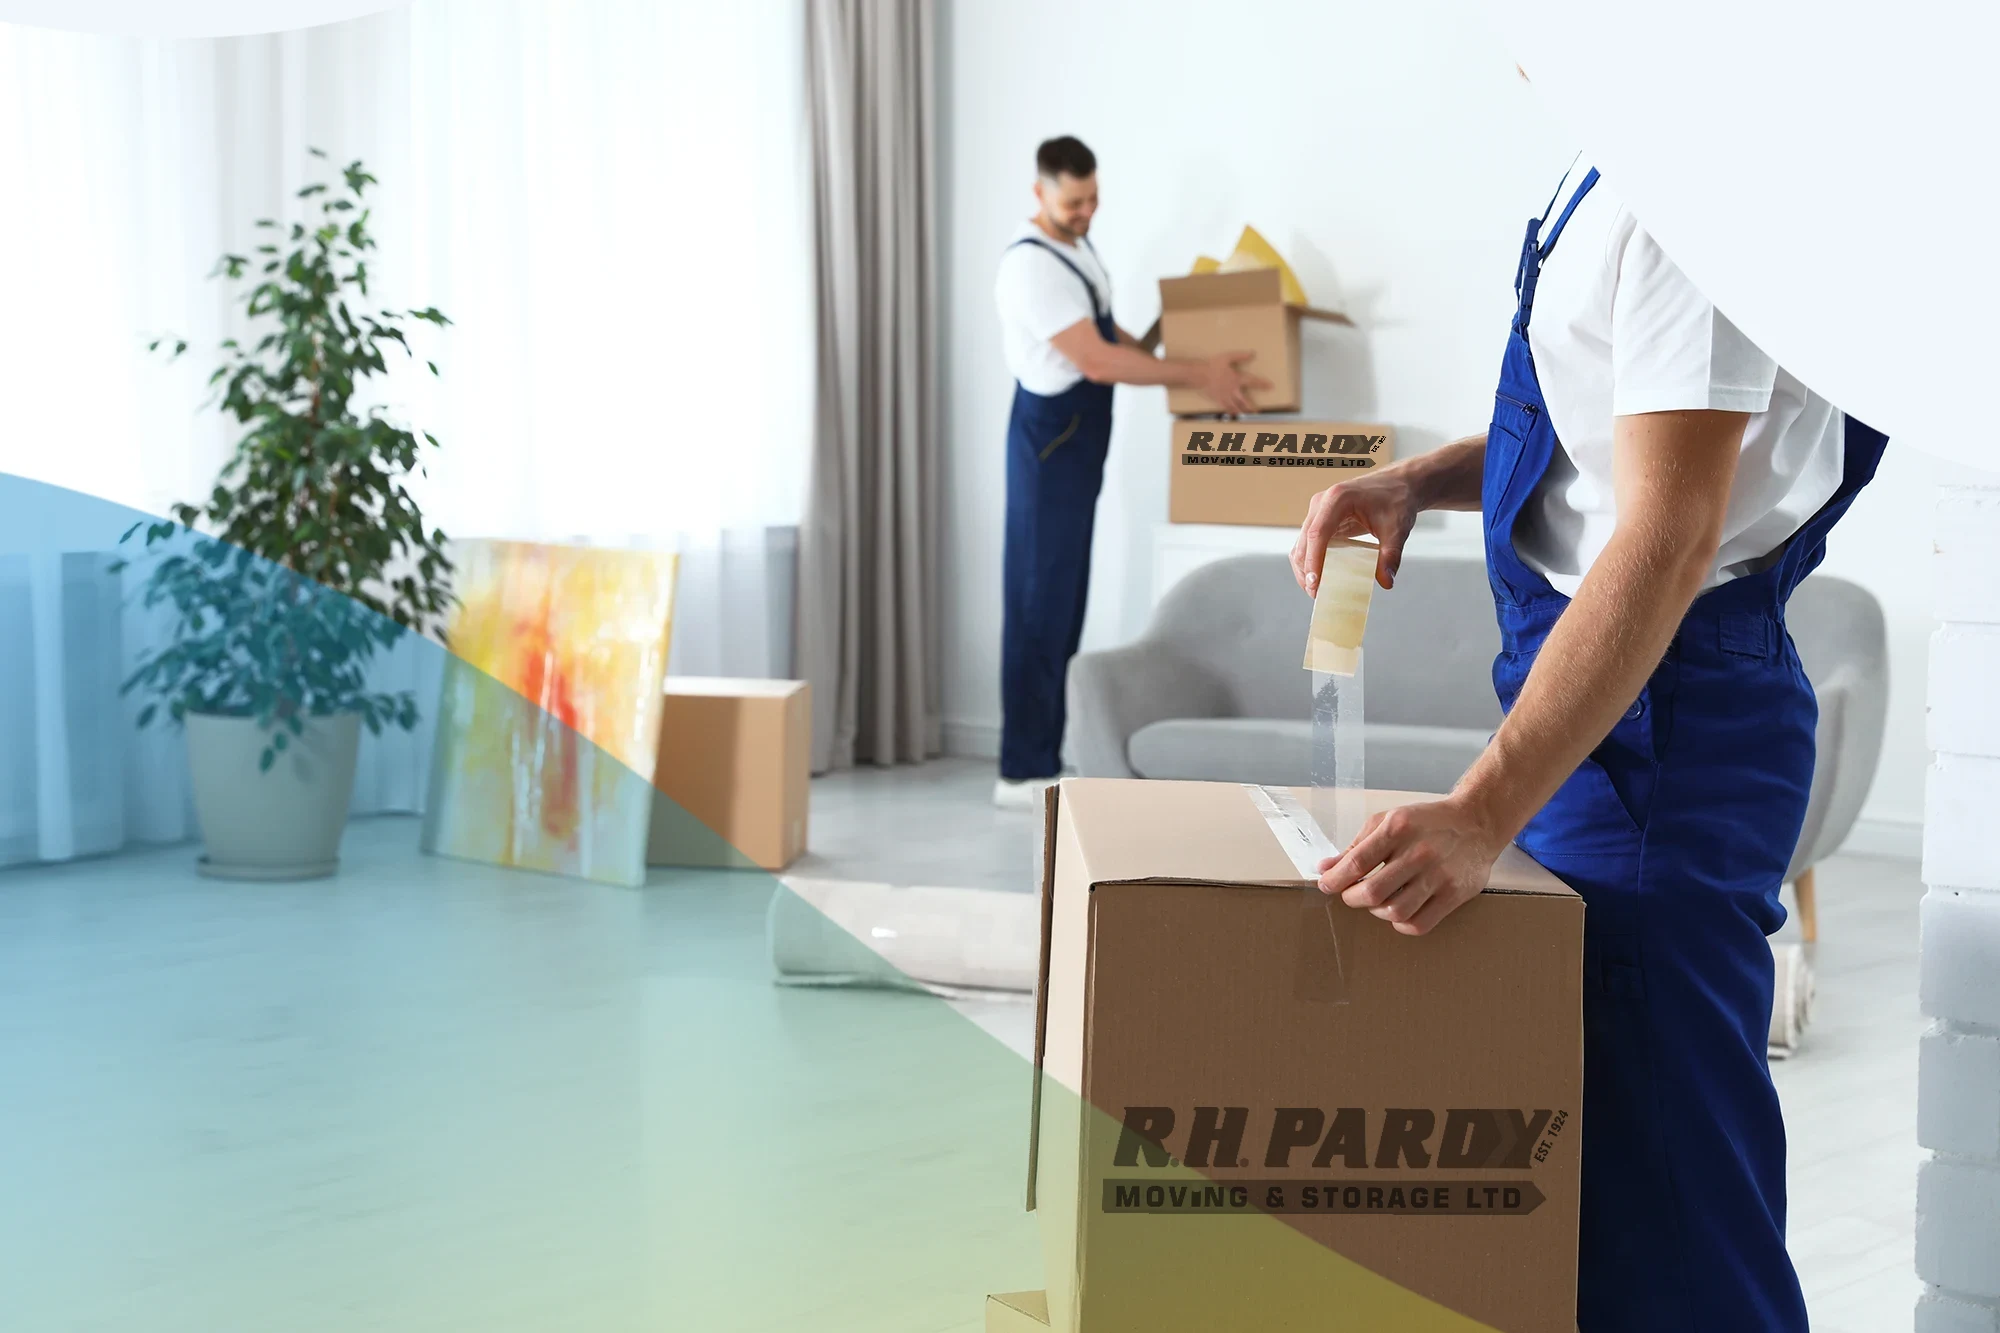 A moving company service helping packing to move home